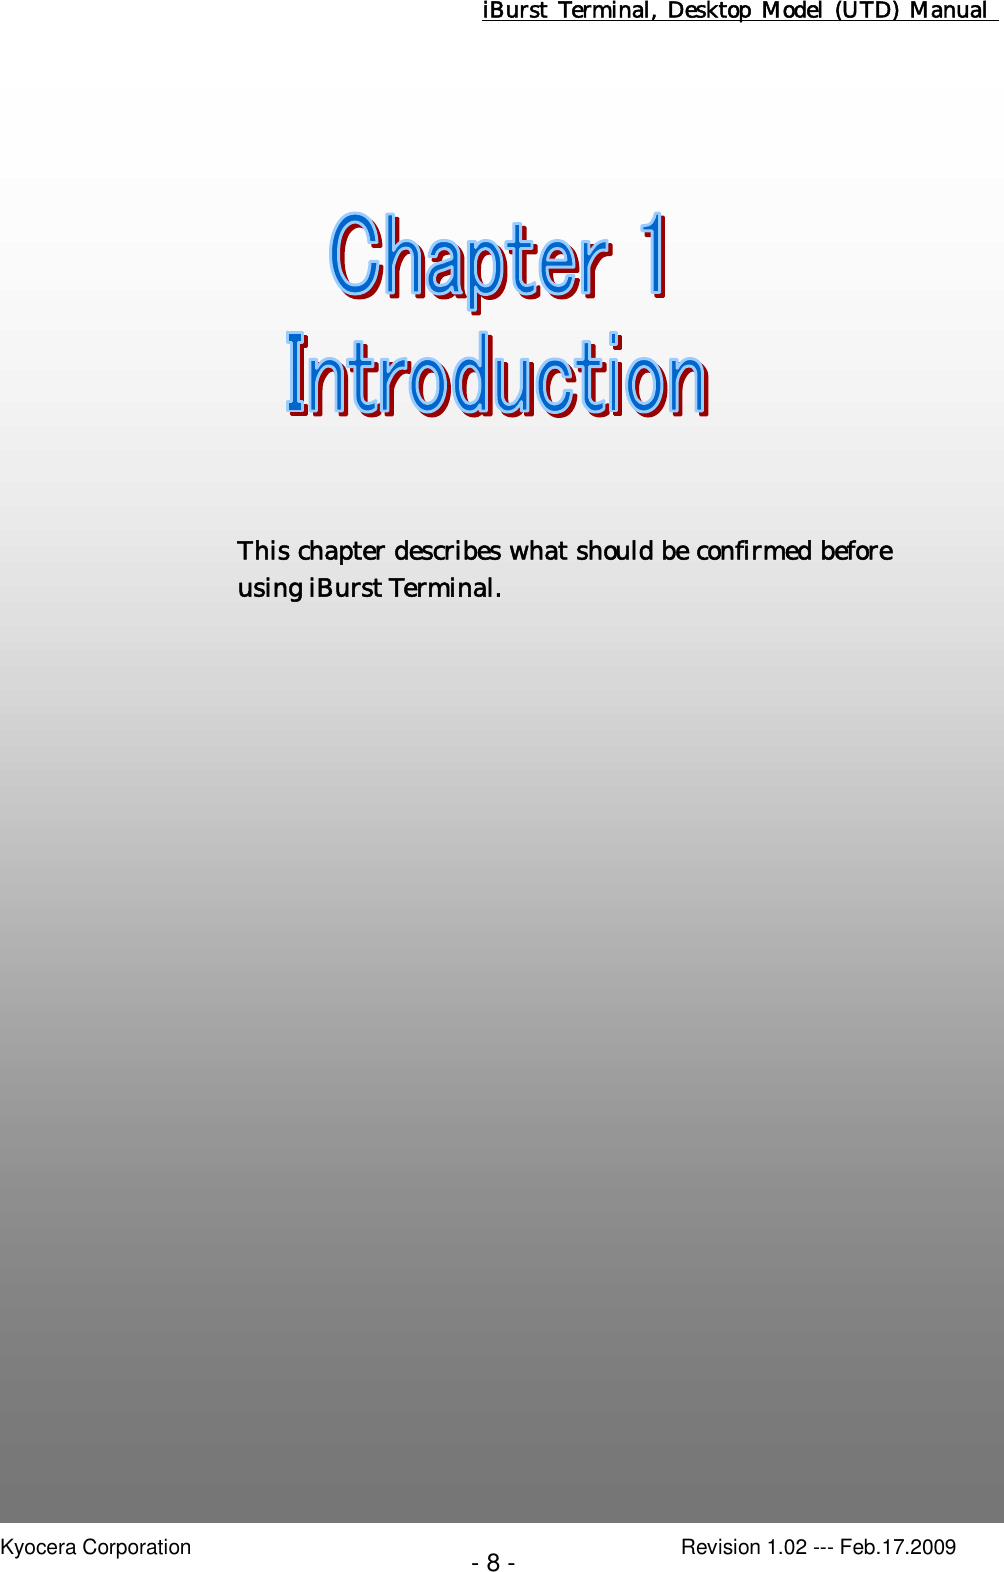 iBurst  Terminal, Desktop  Model  (UTD)  Manual    Kyocera Corporation                                                                                              Revision 1.02 --- Feb.17.2009 - 8 -   Chapter 1 Introduction                              7      This chapter describes what should be confirmed before using iBurst Terminal. 